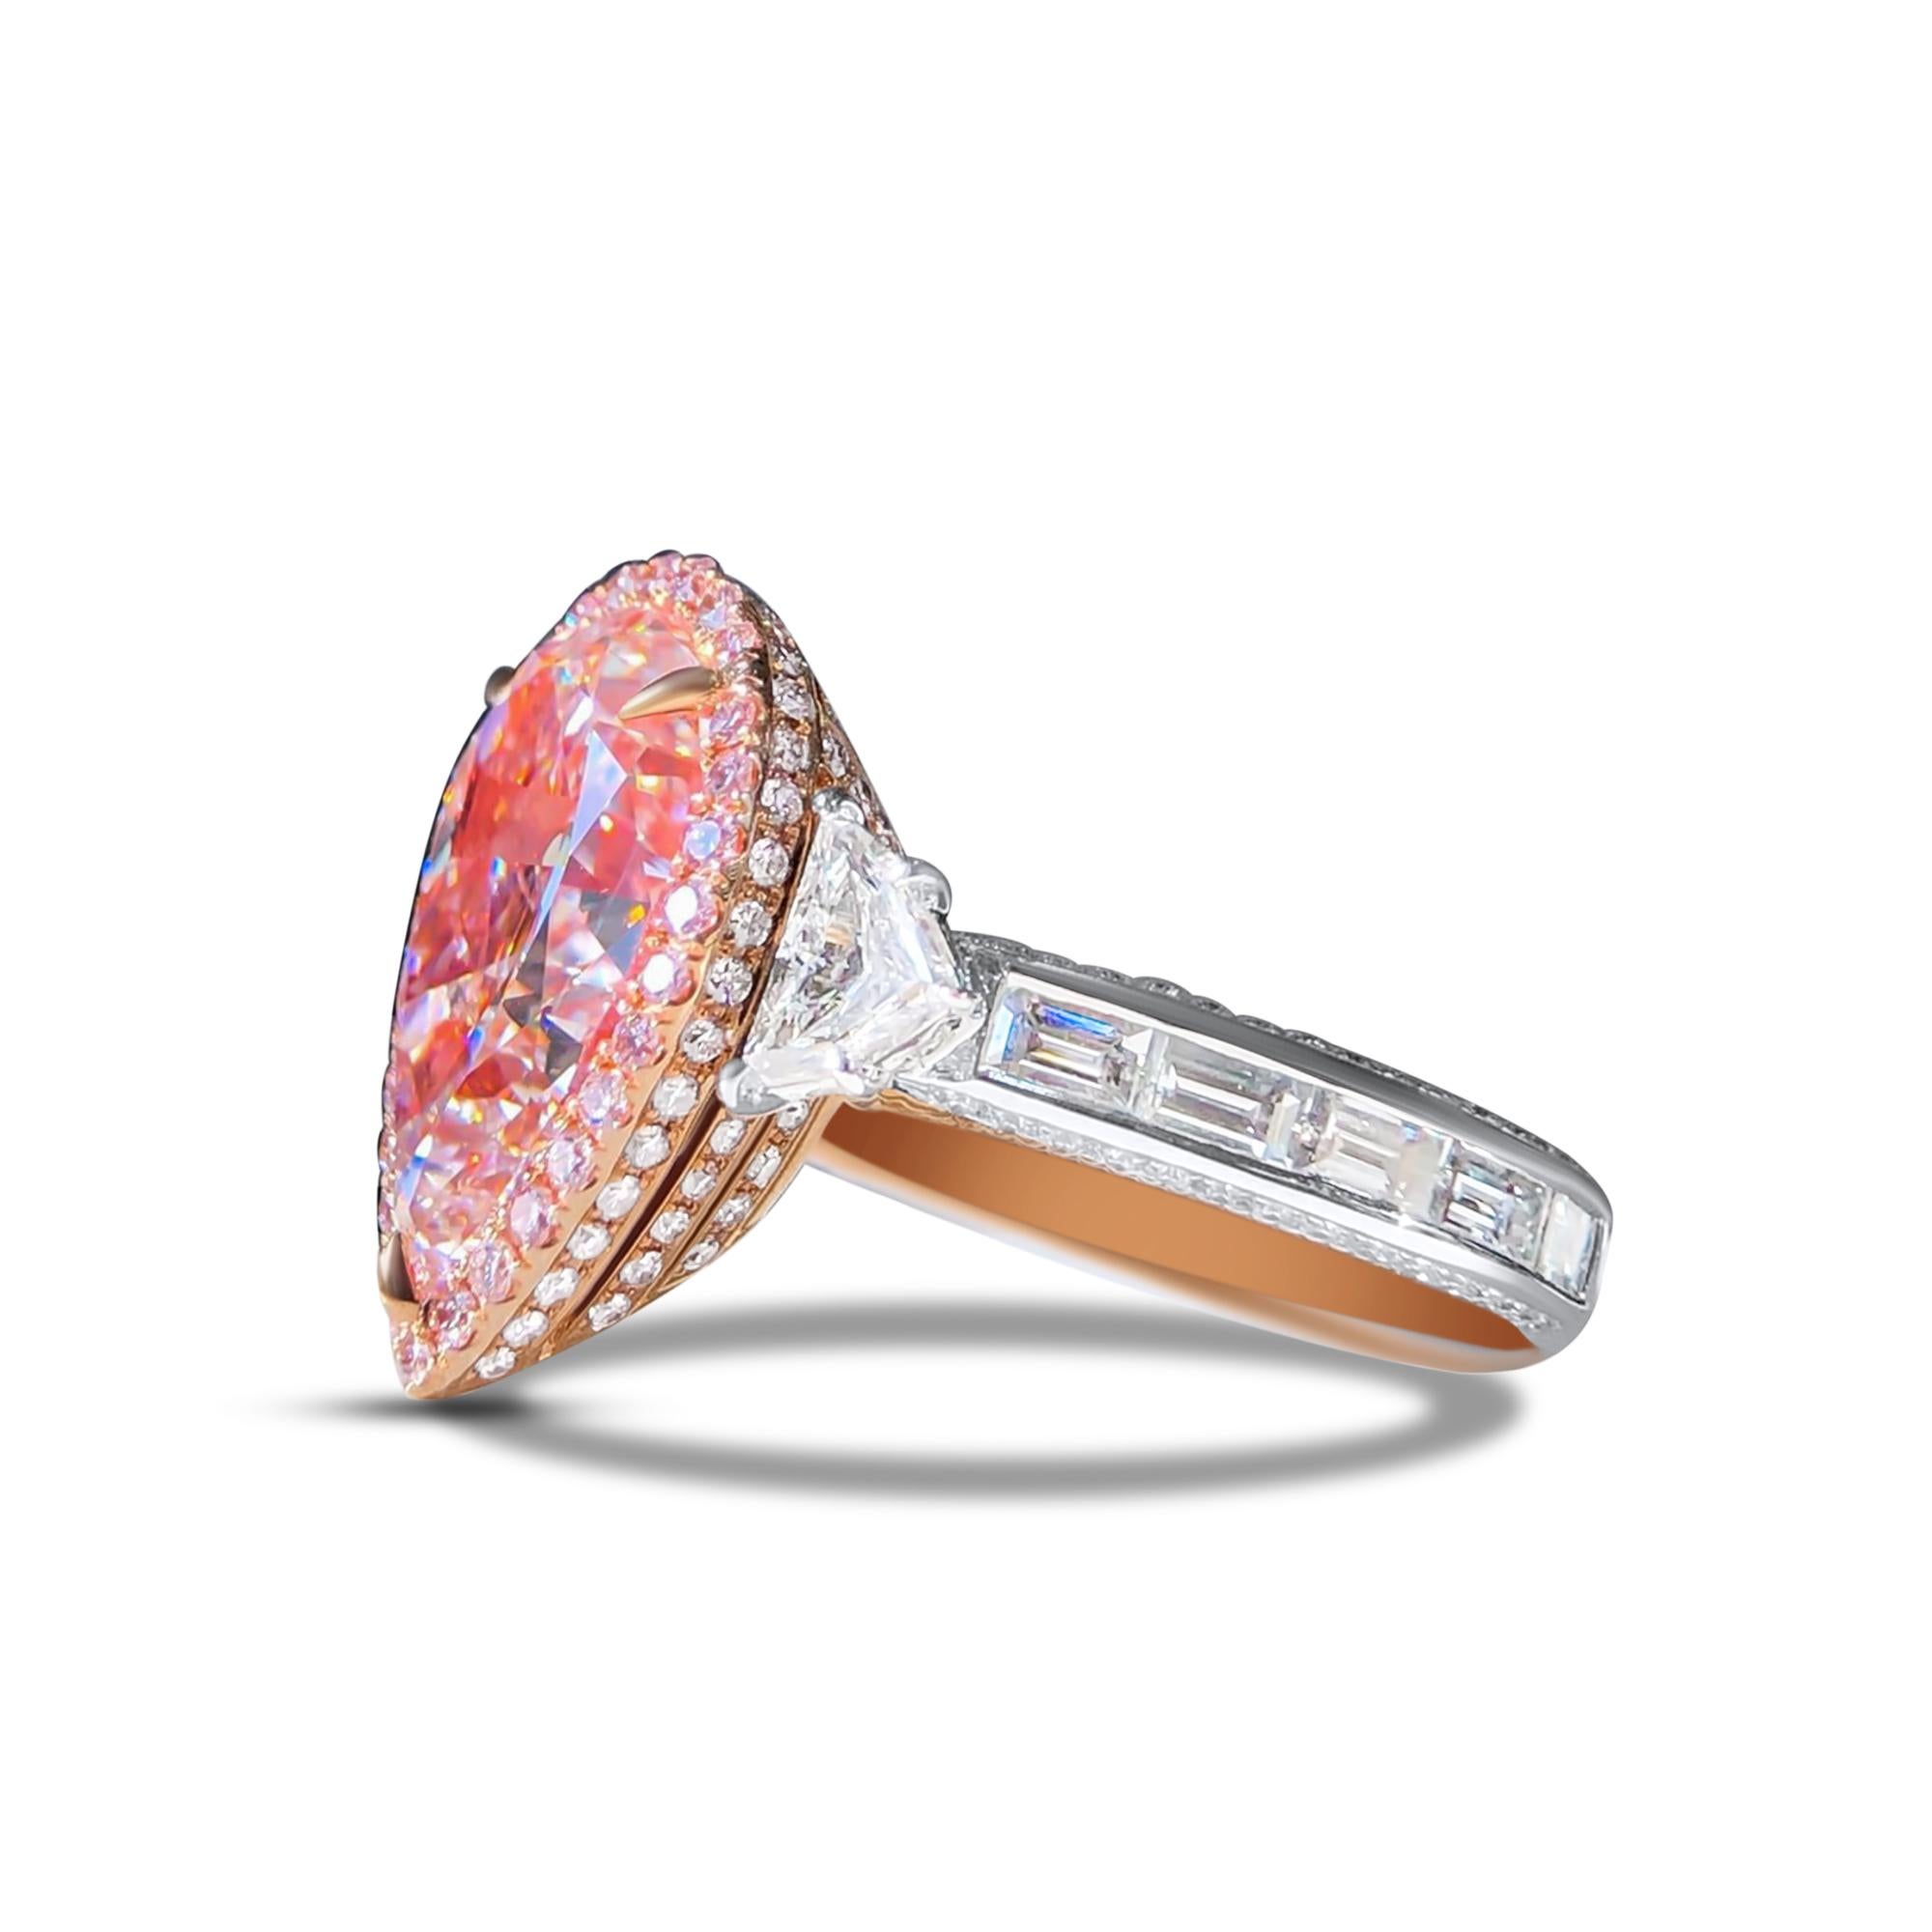 We invite you to discover this magnificent, extremely rare collectible ring set with a wonderful 7.58 carat GIA certified Internally Flawless Rosé pear cut diamond accented with a pink diamond halo of colorless baguette and triangular diamonds.